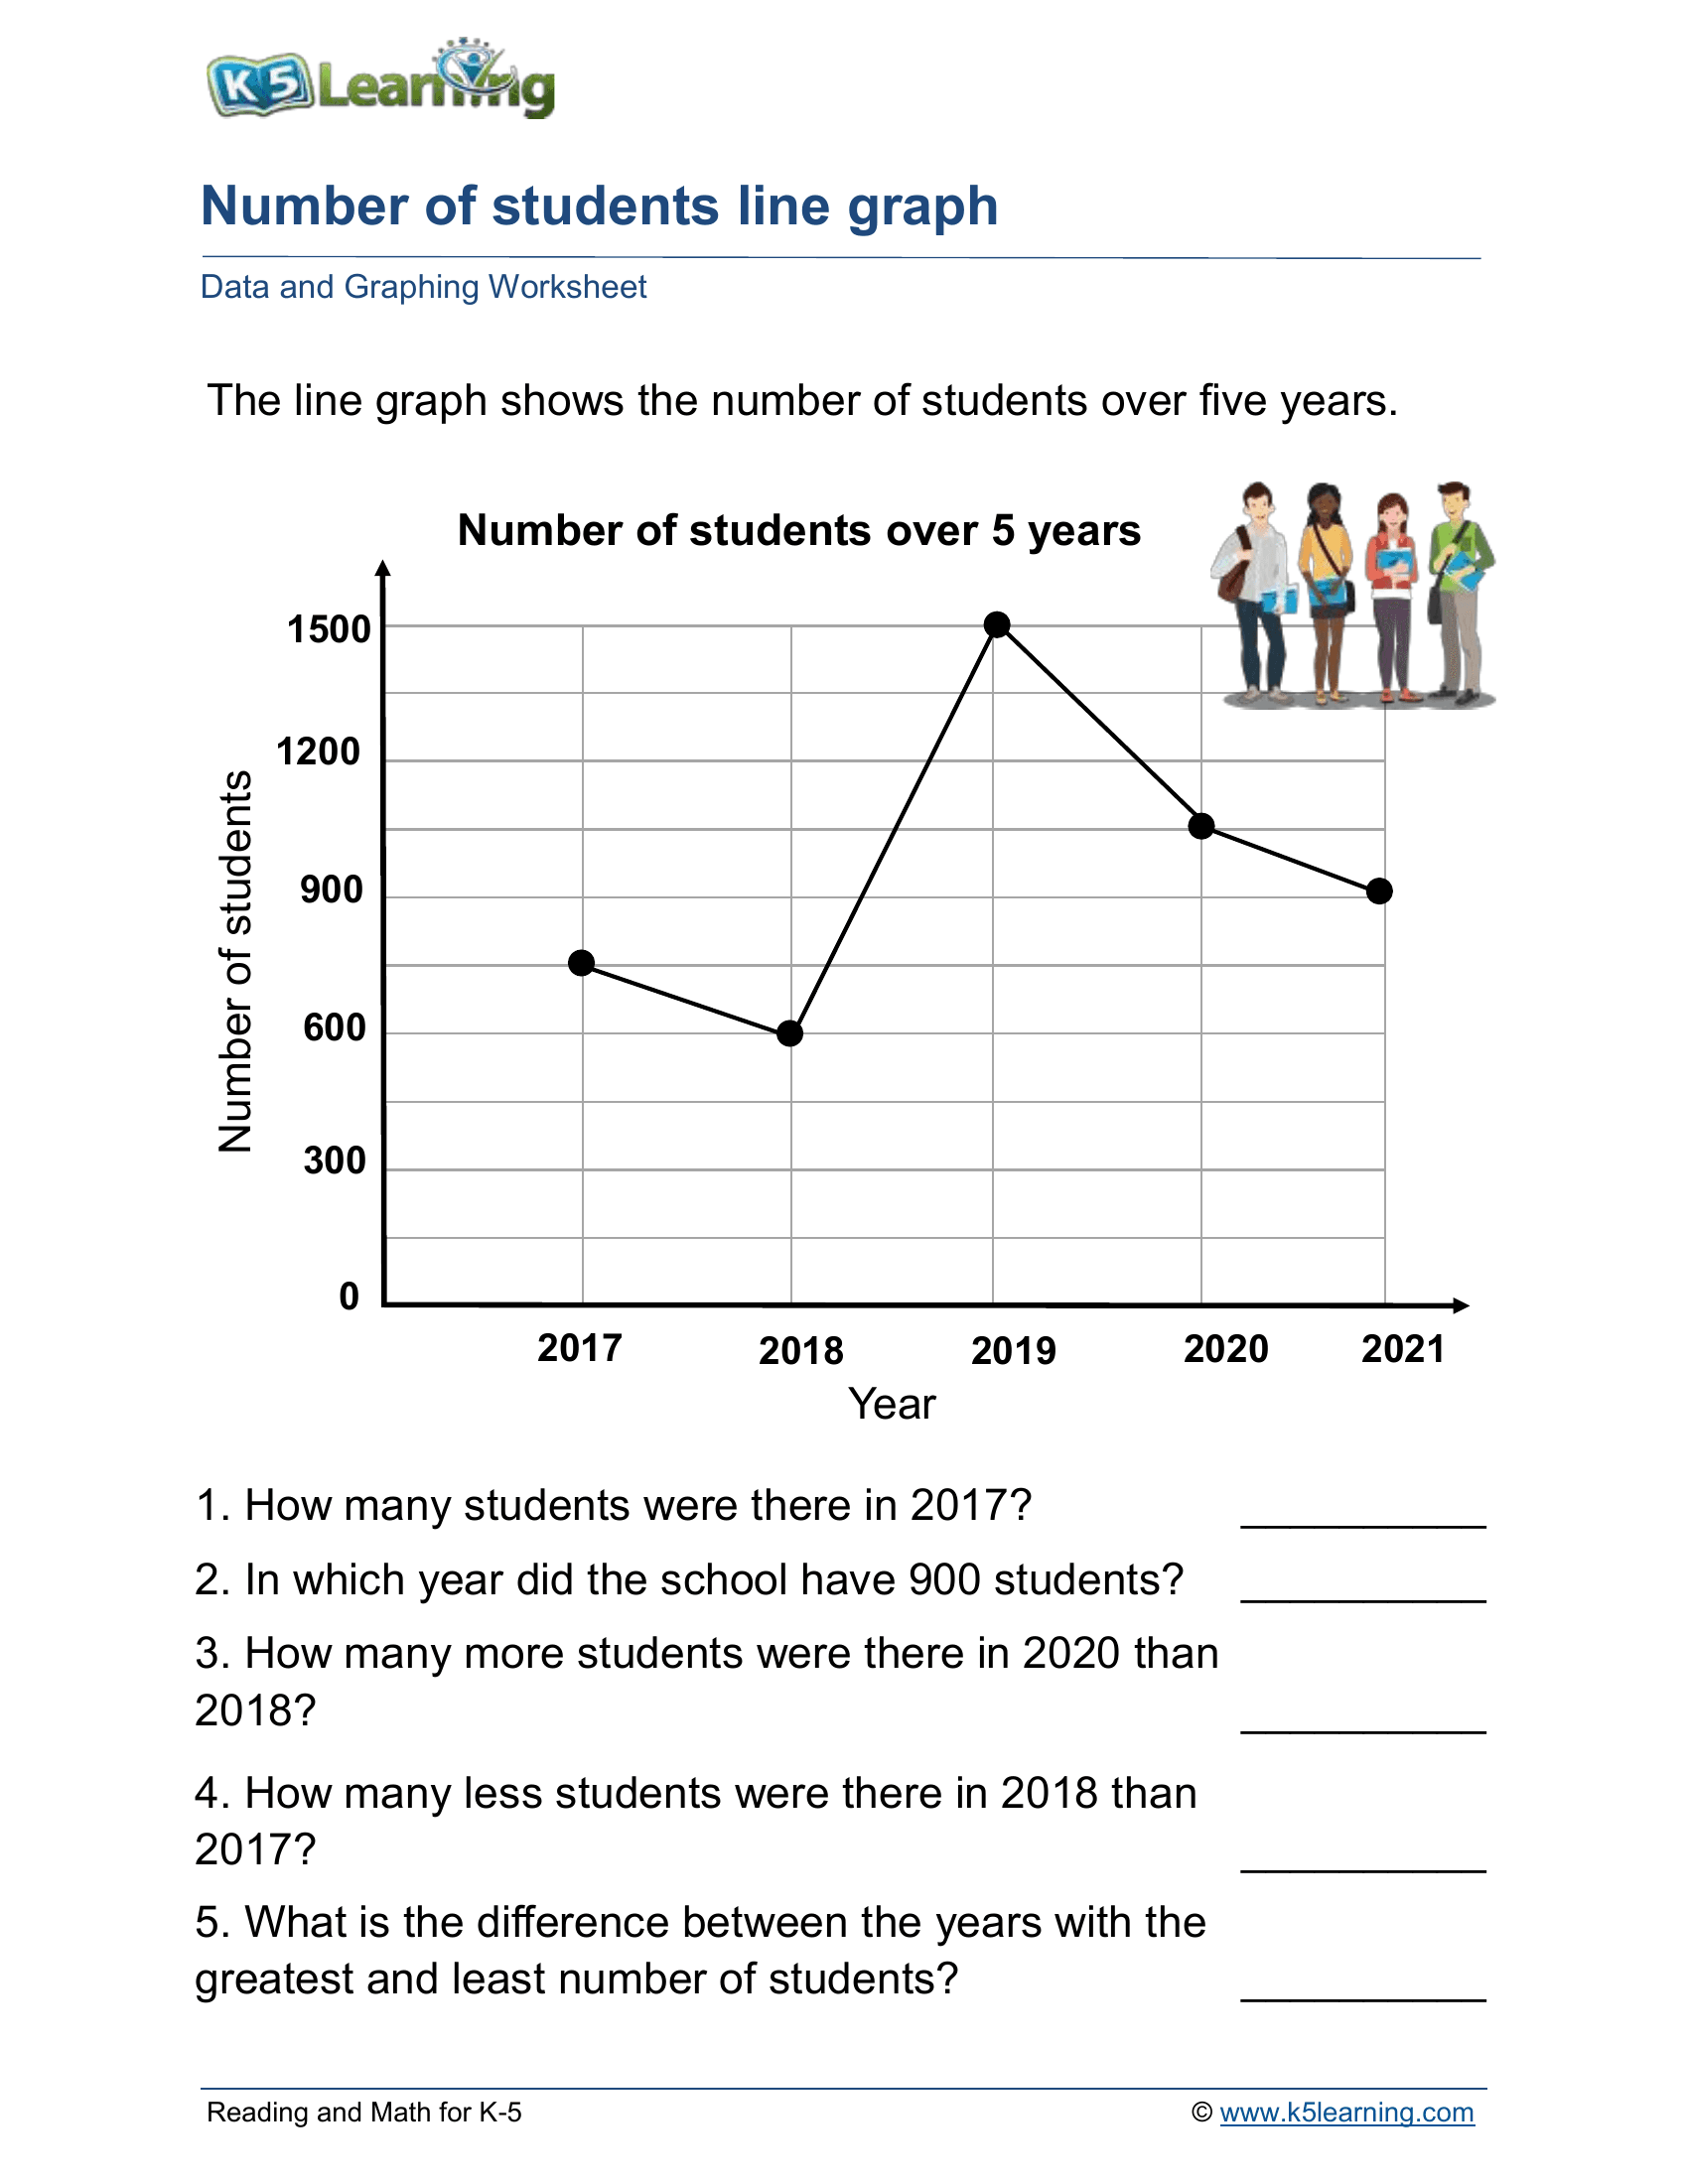 Number of students line graph